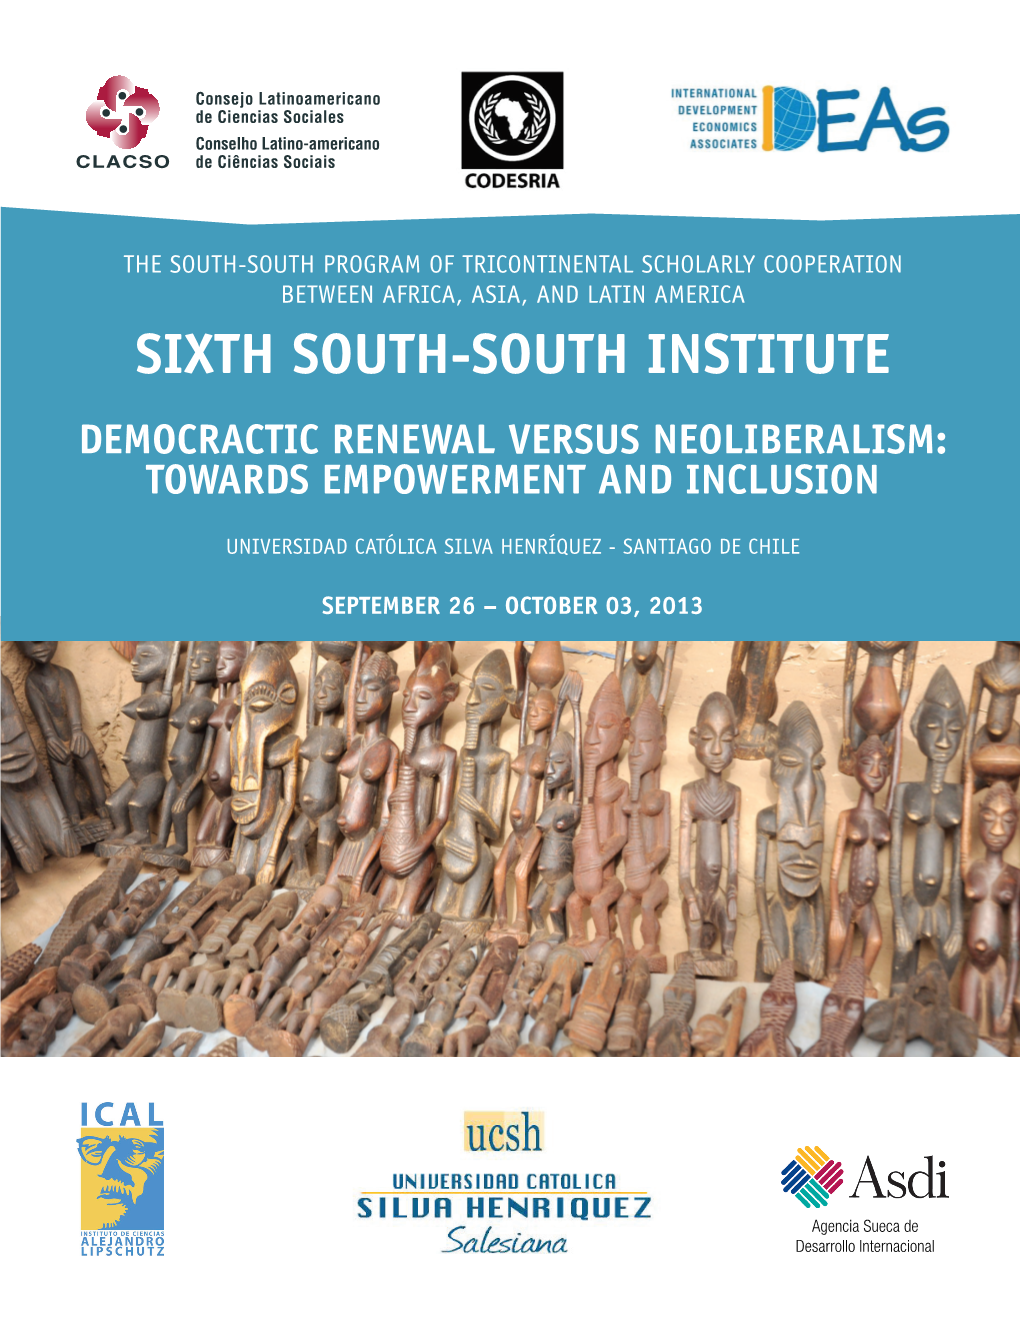 Sixth South-South Institute Democractic Renewal Versus Neoliberalism: Towards Empowerment and Inclusion